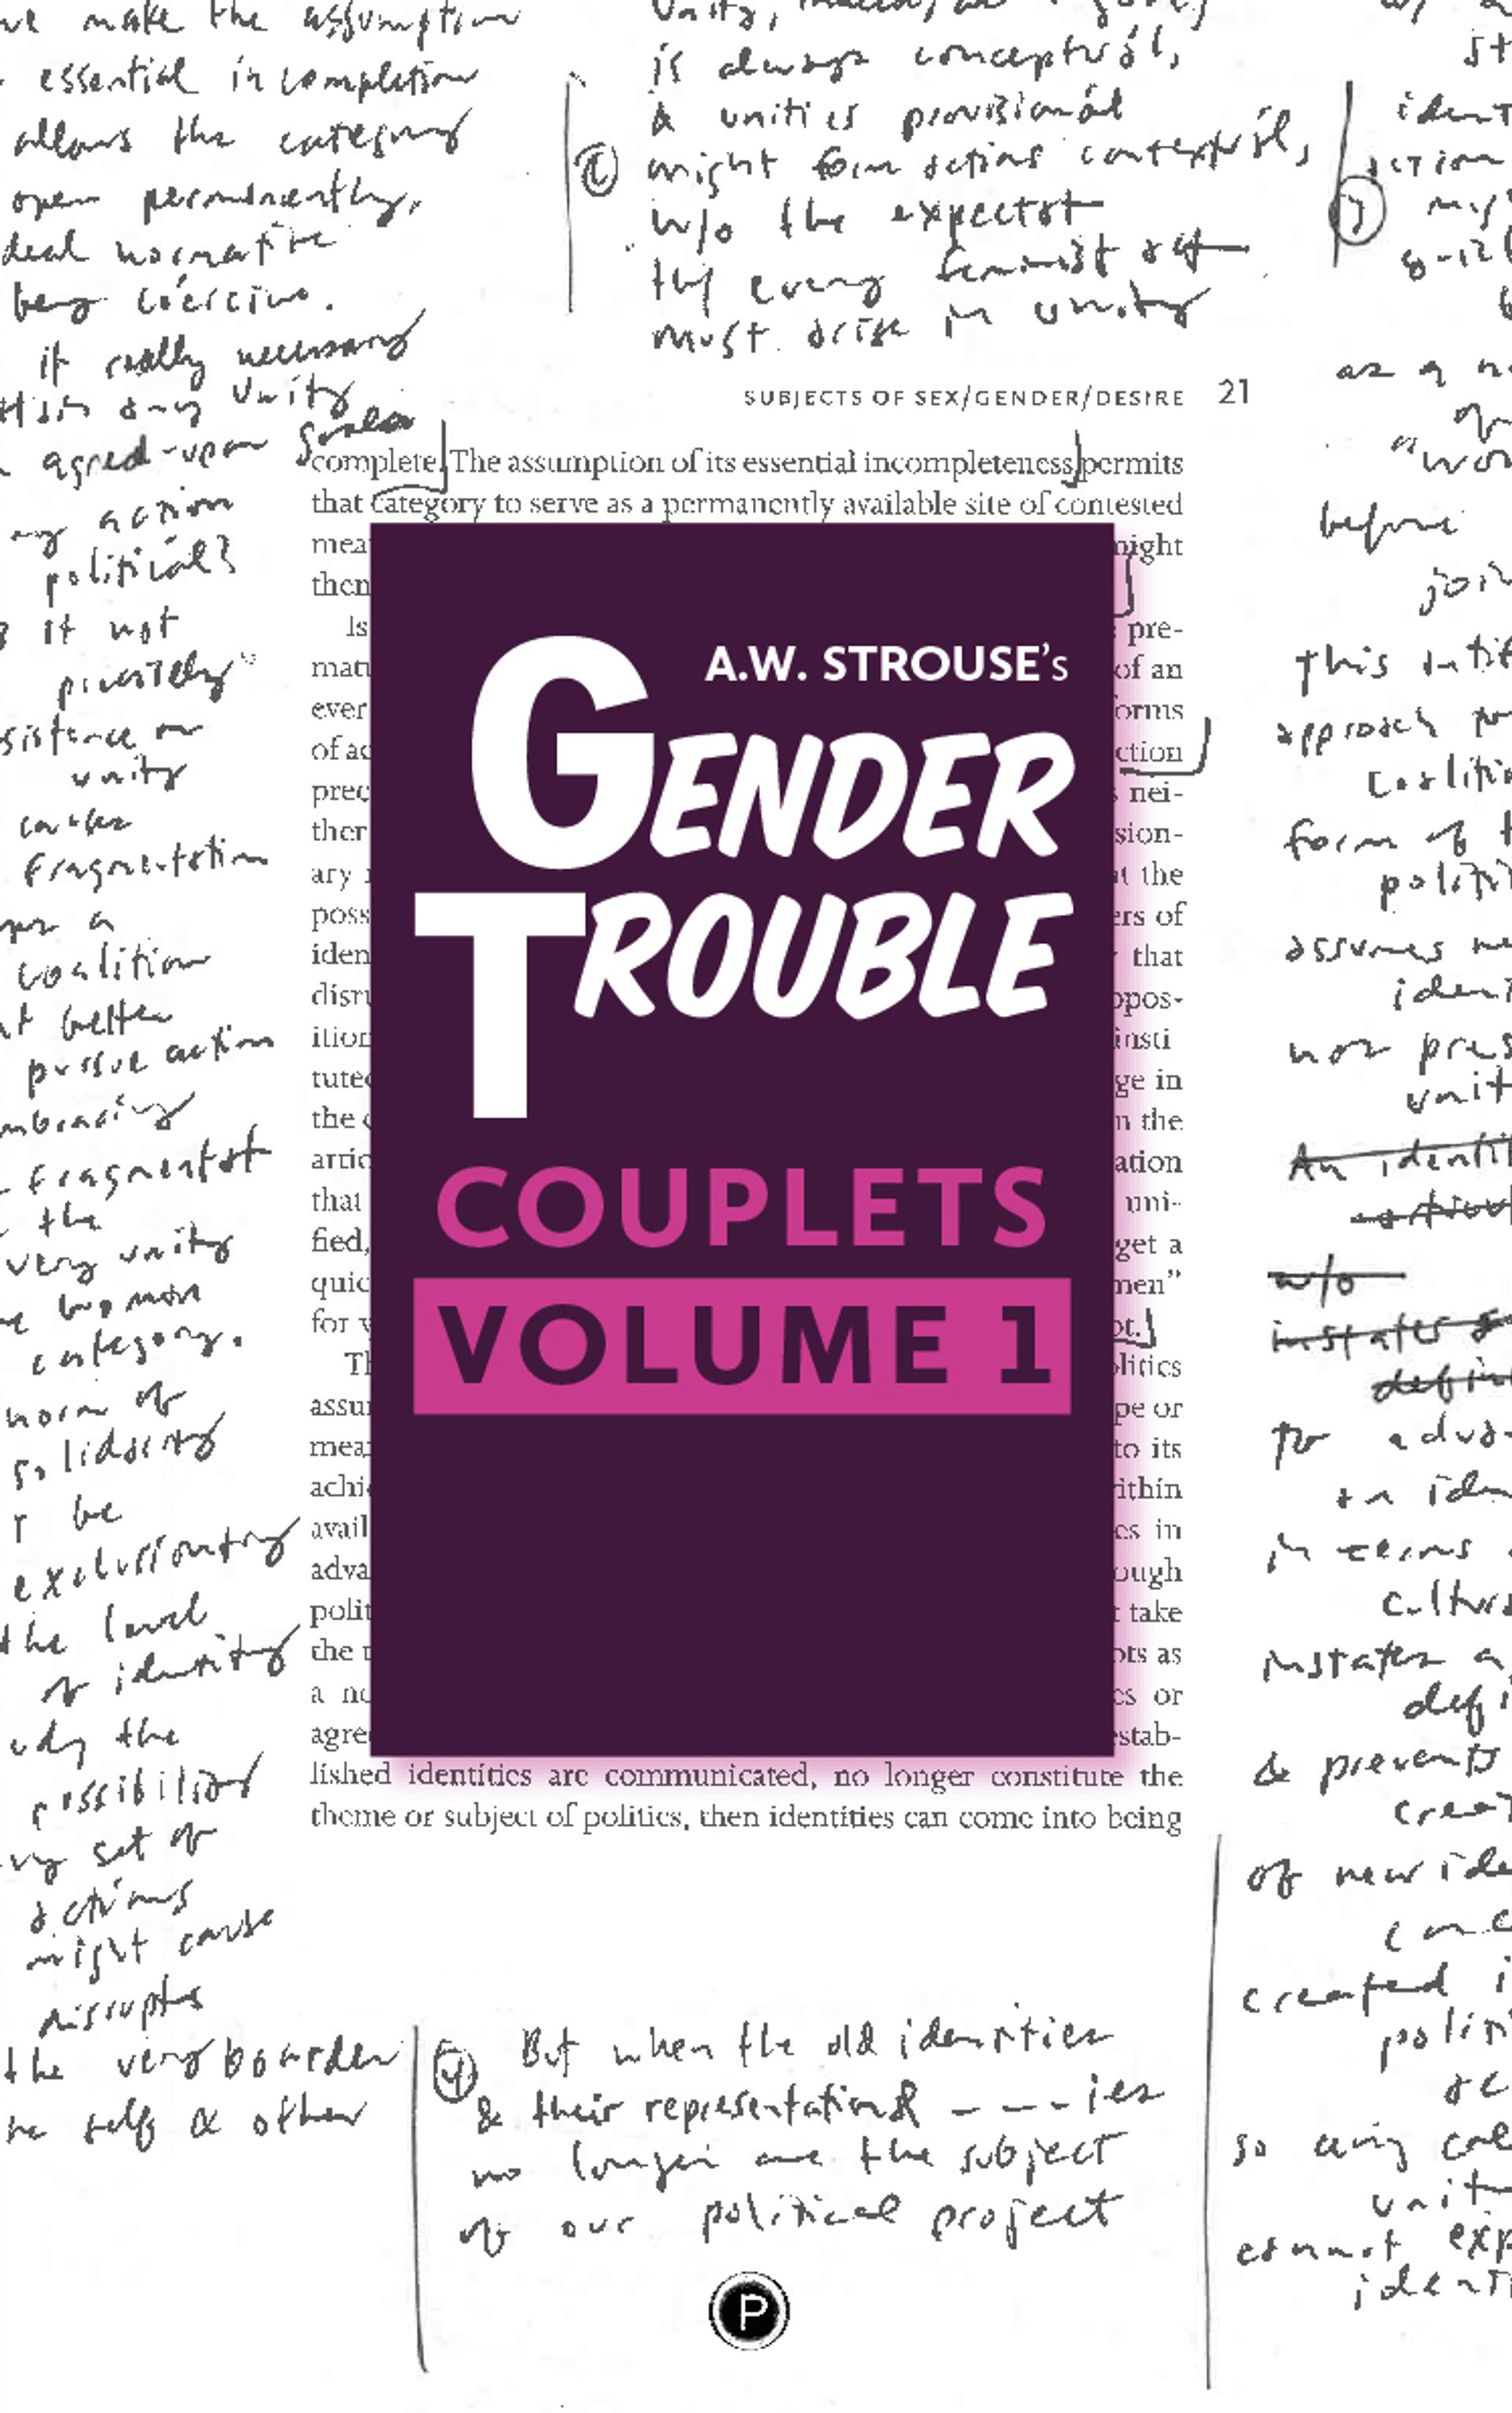 Cover of book titled Gender Trouble Couplets, Volume 1